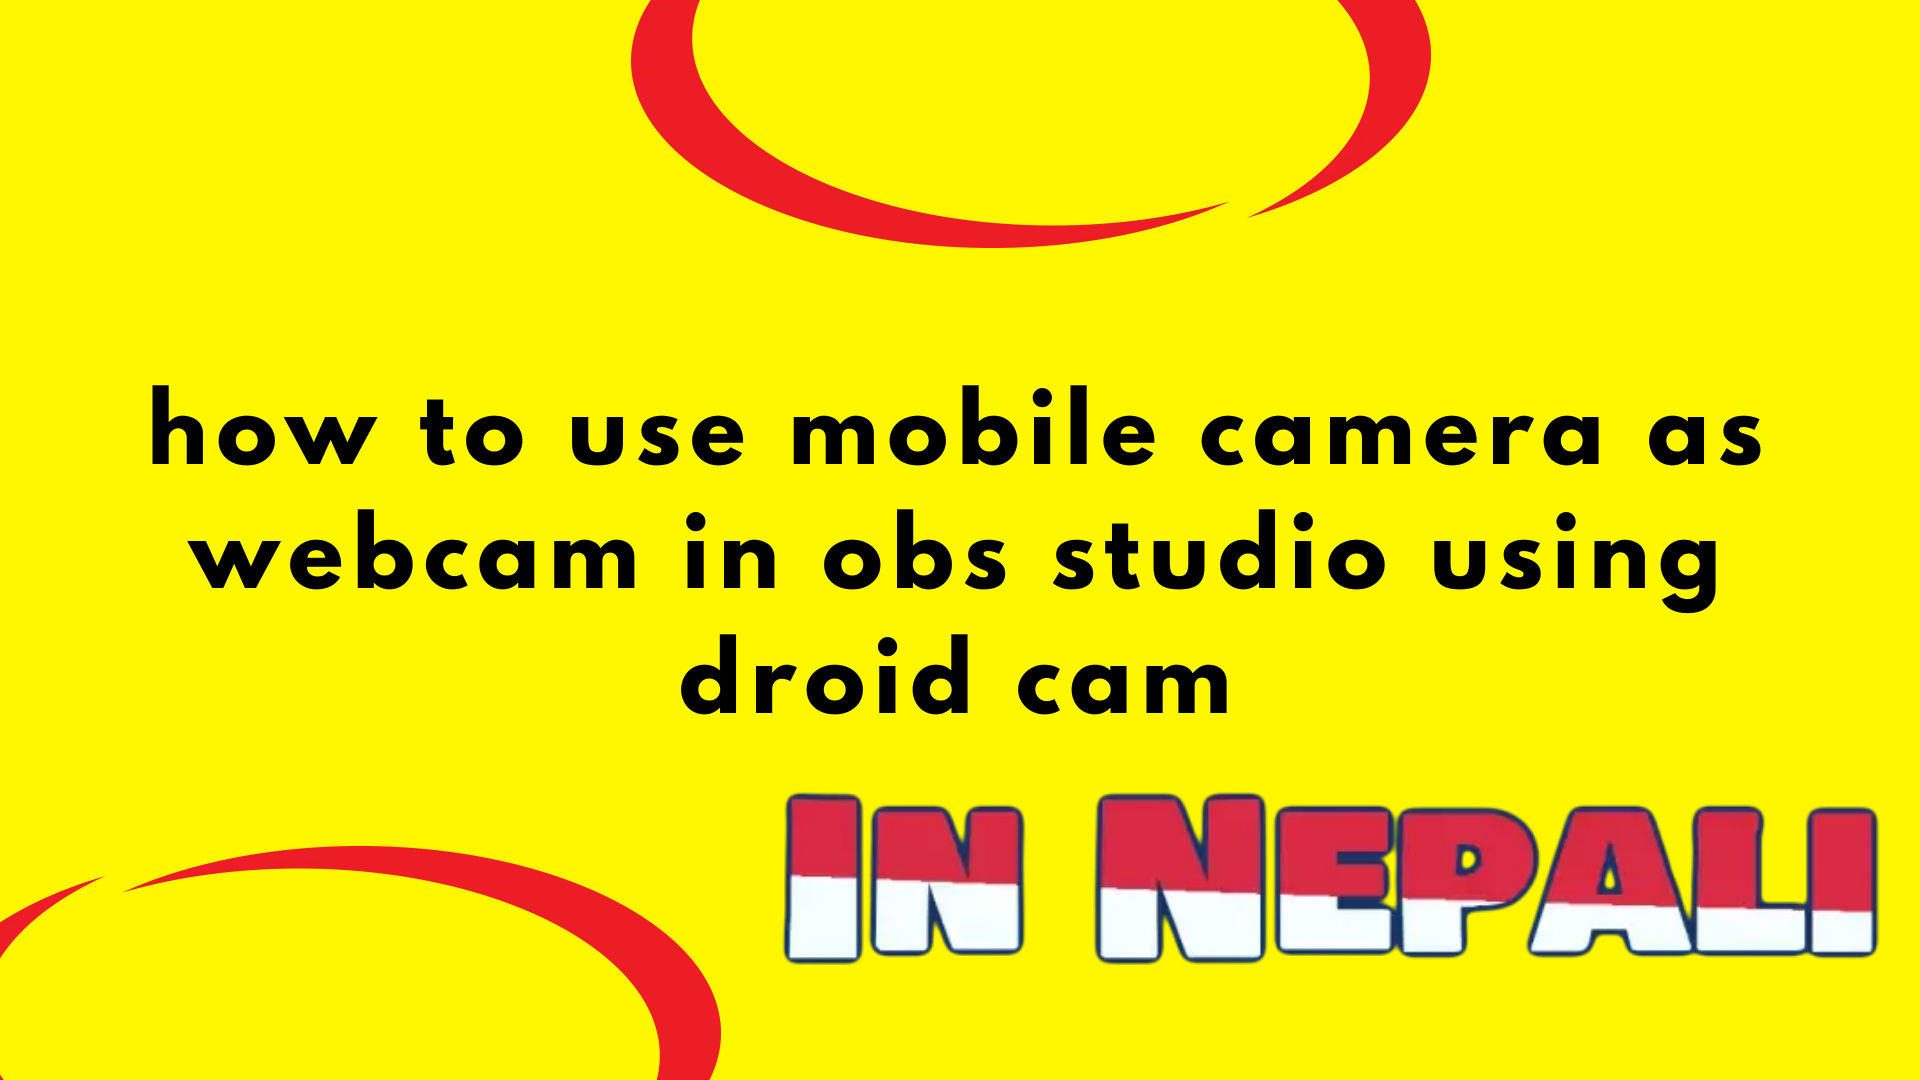 how to use mobile camera as webcam in obs studio using droid cam| Bigsansar